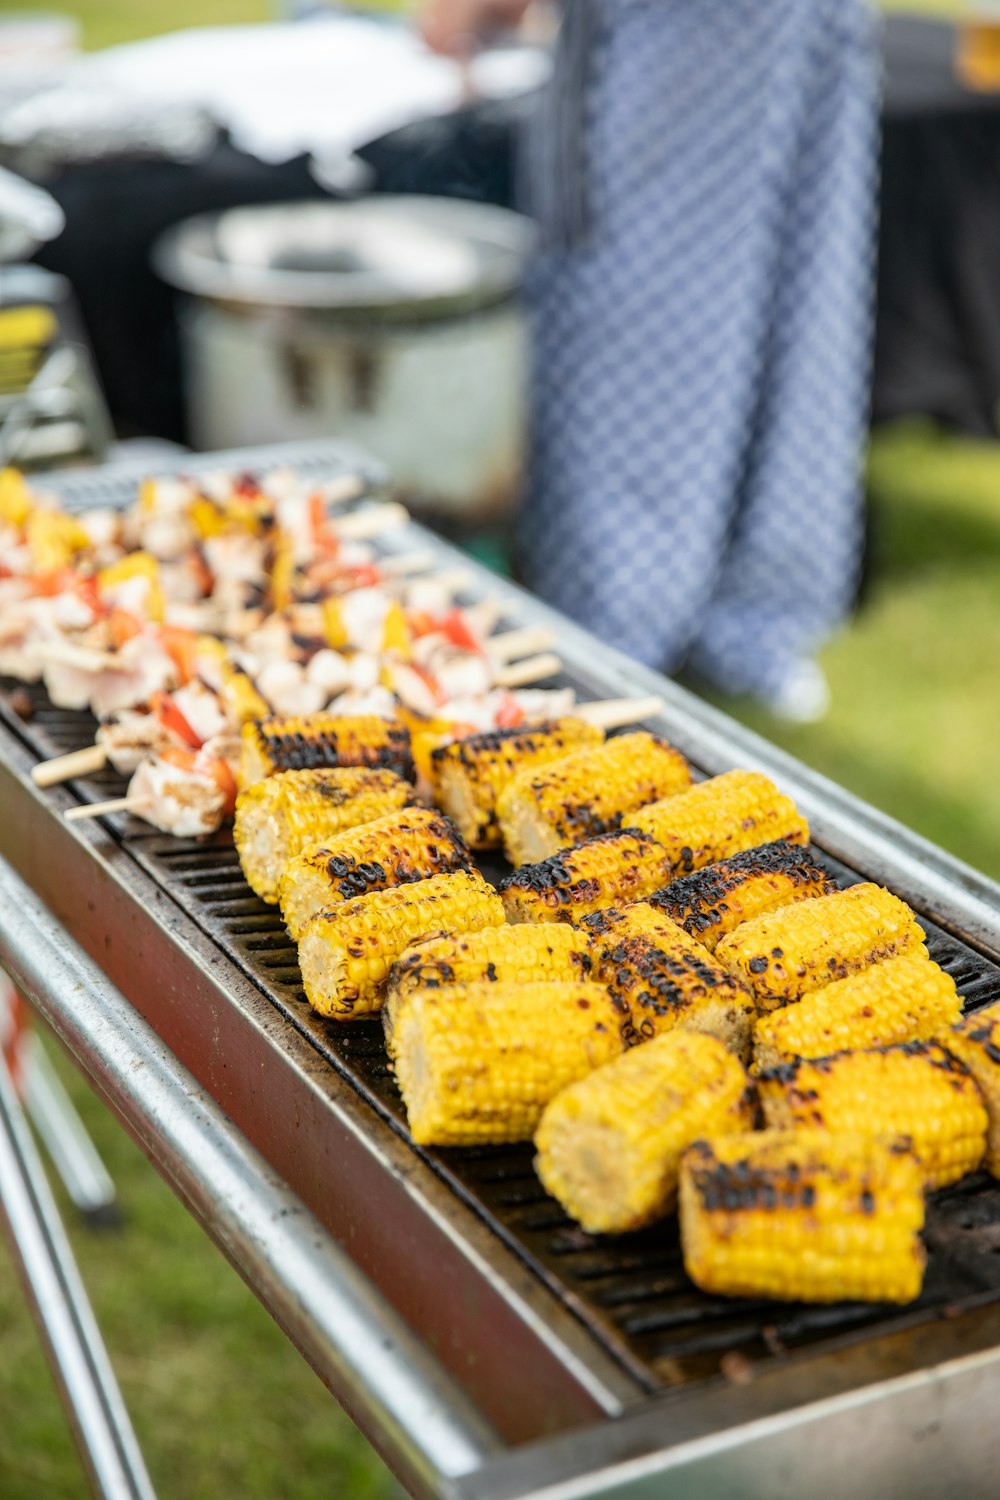 corn on the cob being cooked on a grill